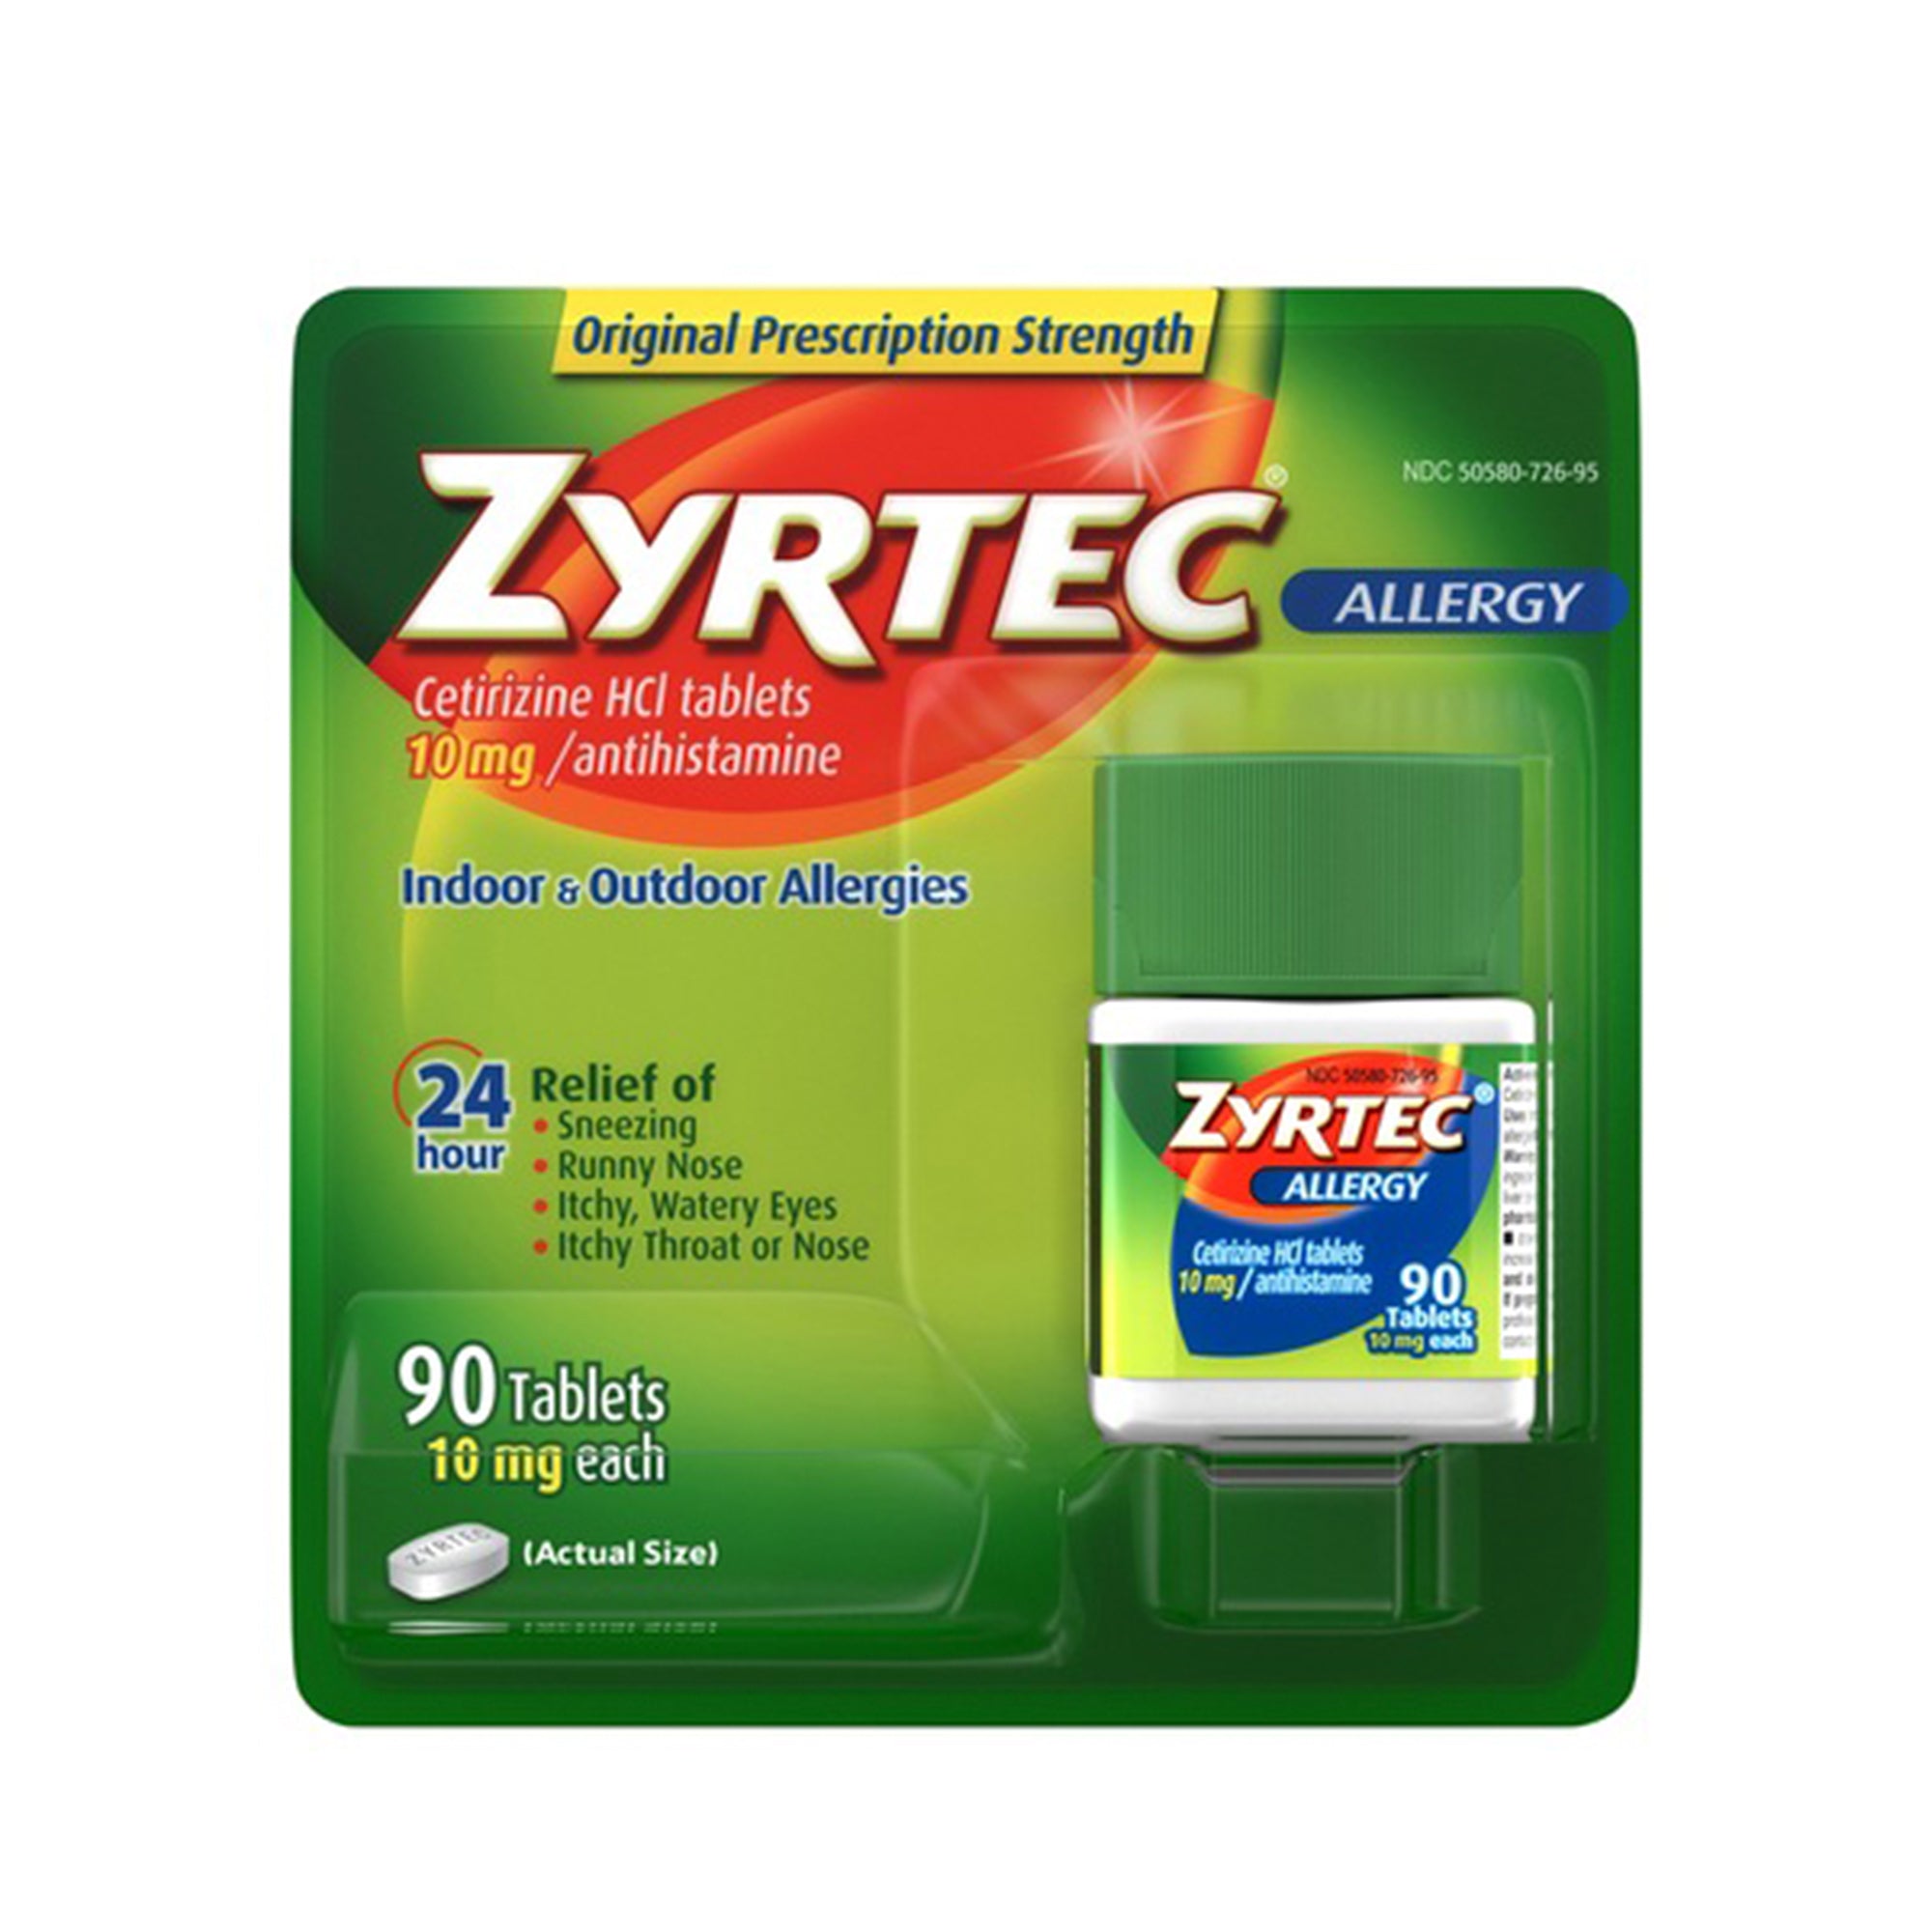 Zyrtec 24HR Allergy Relief Tablets 10mg Cetirizine HCl, 90 Tables